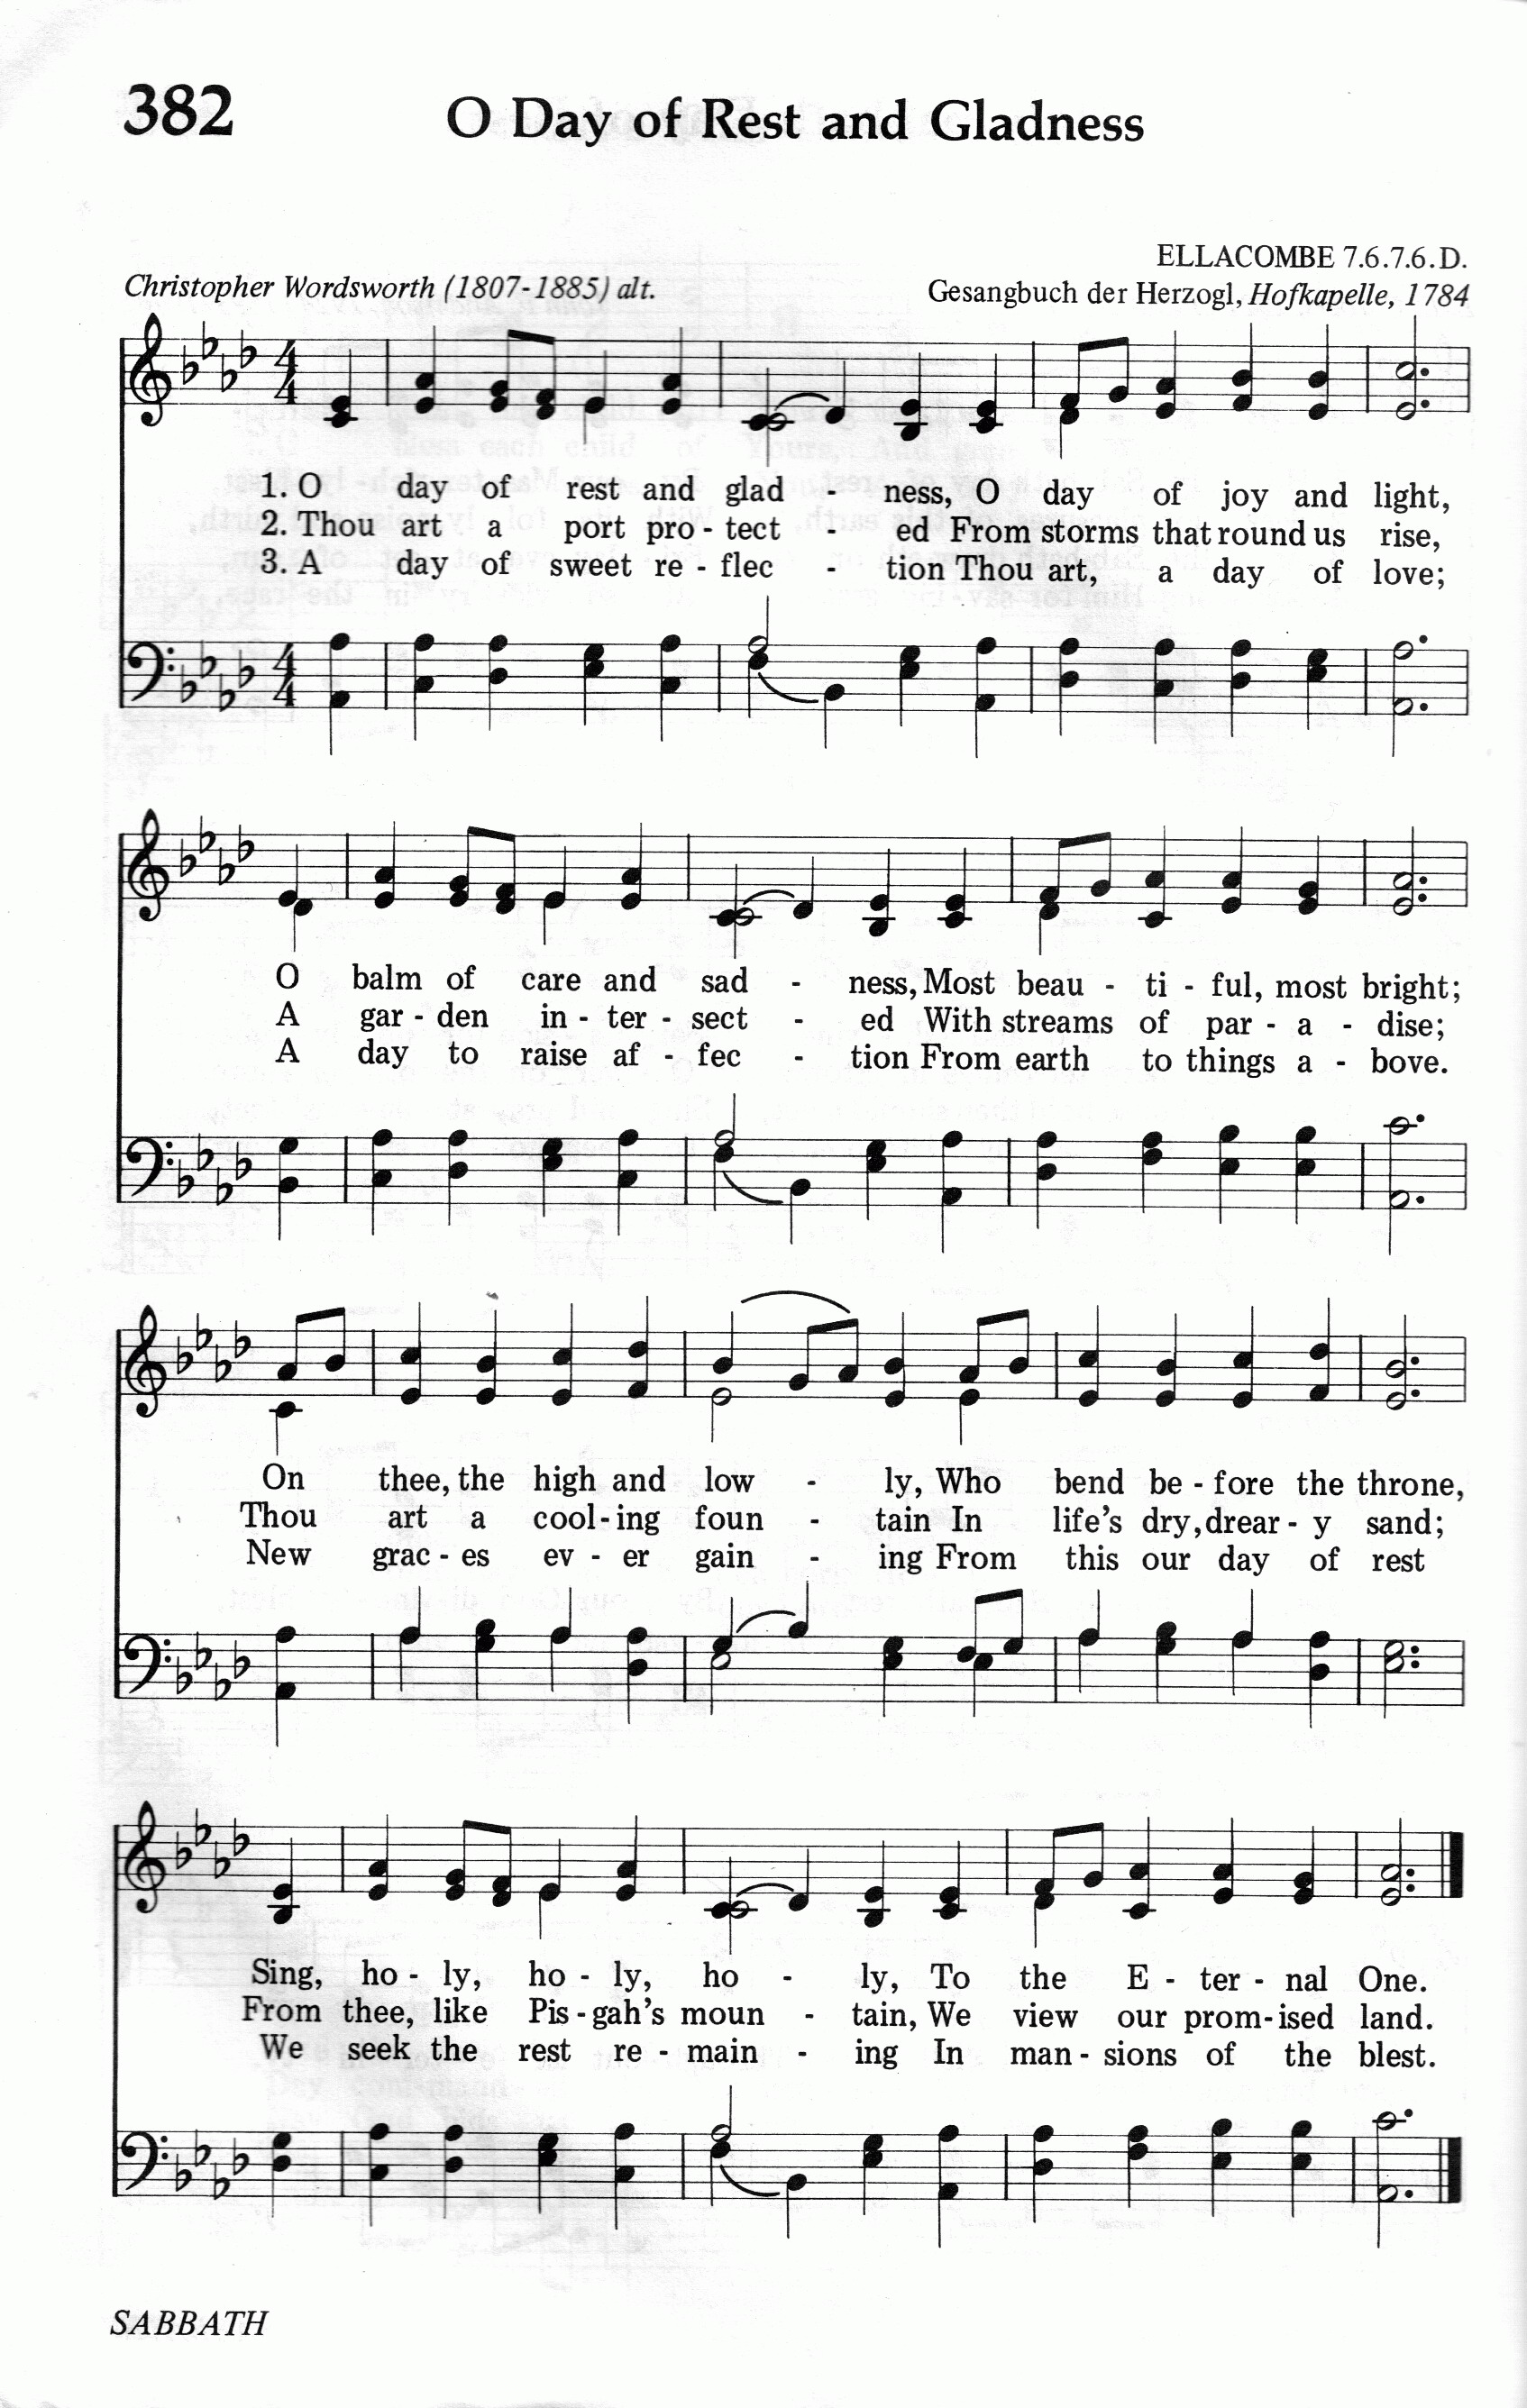 382.O Day of Rest and Gladness-695HYMN